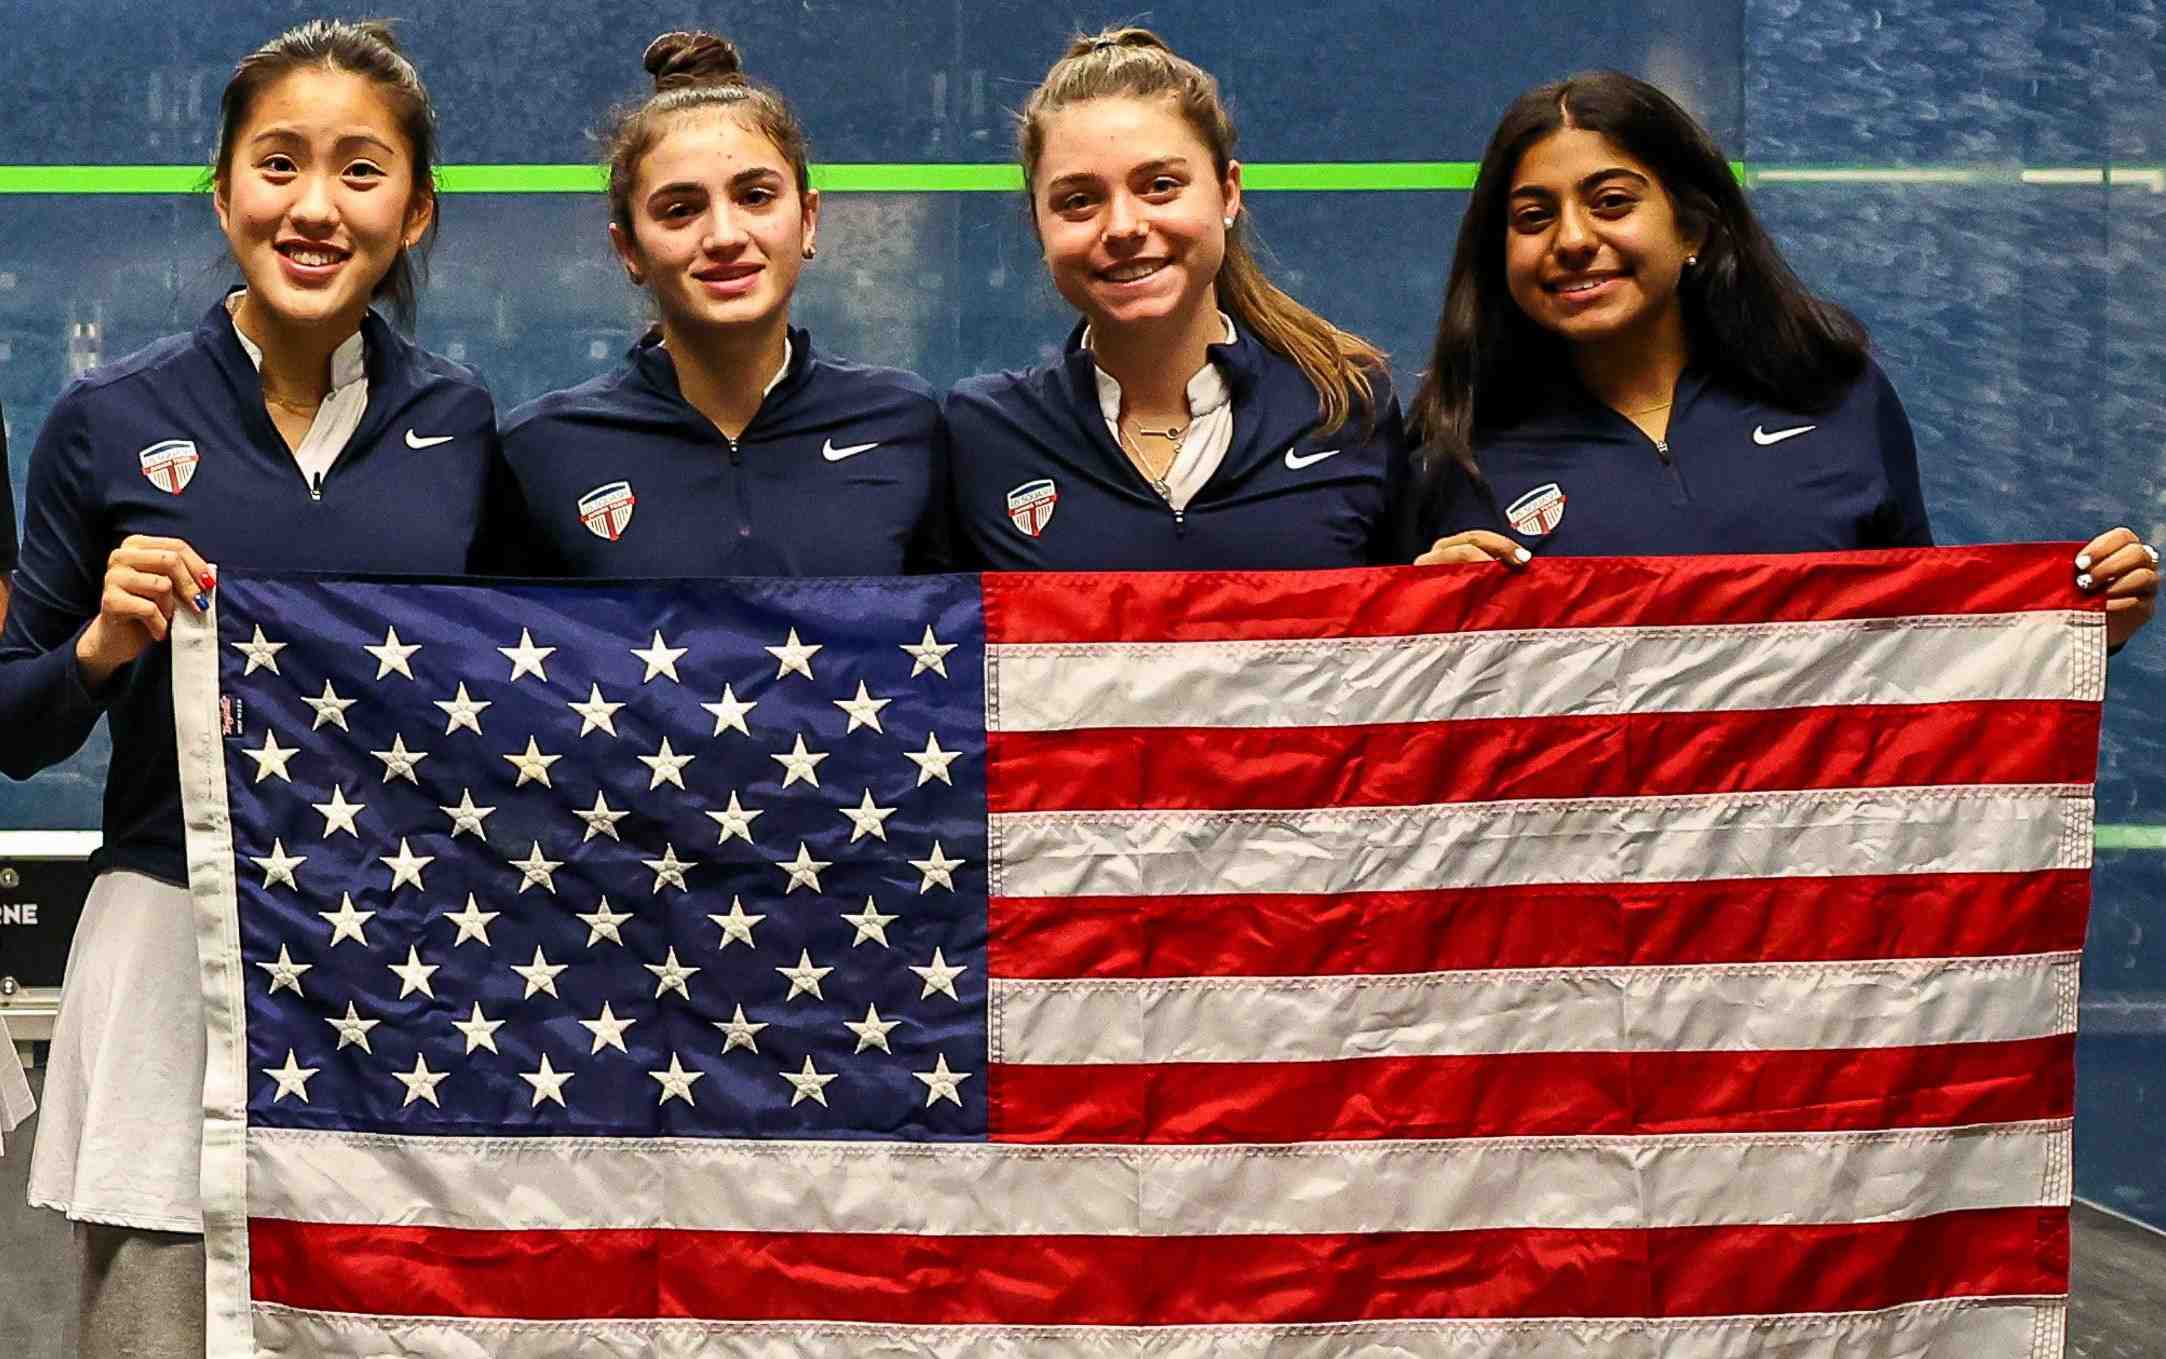 Caroline Fouts: “Team USA is a force to be reckoned with”